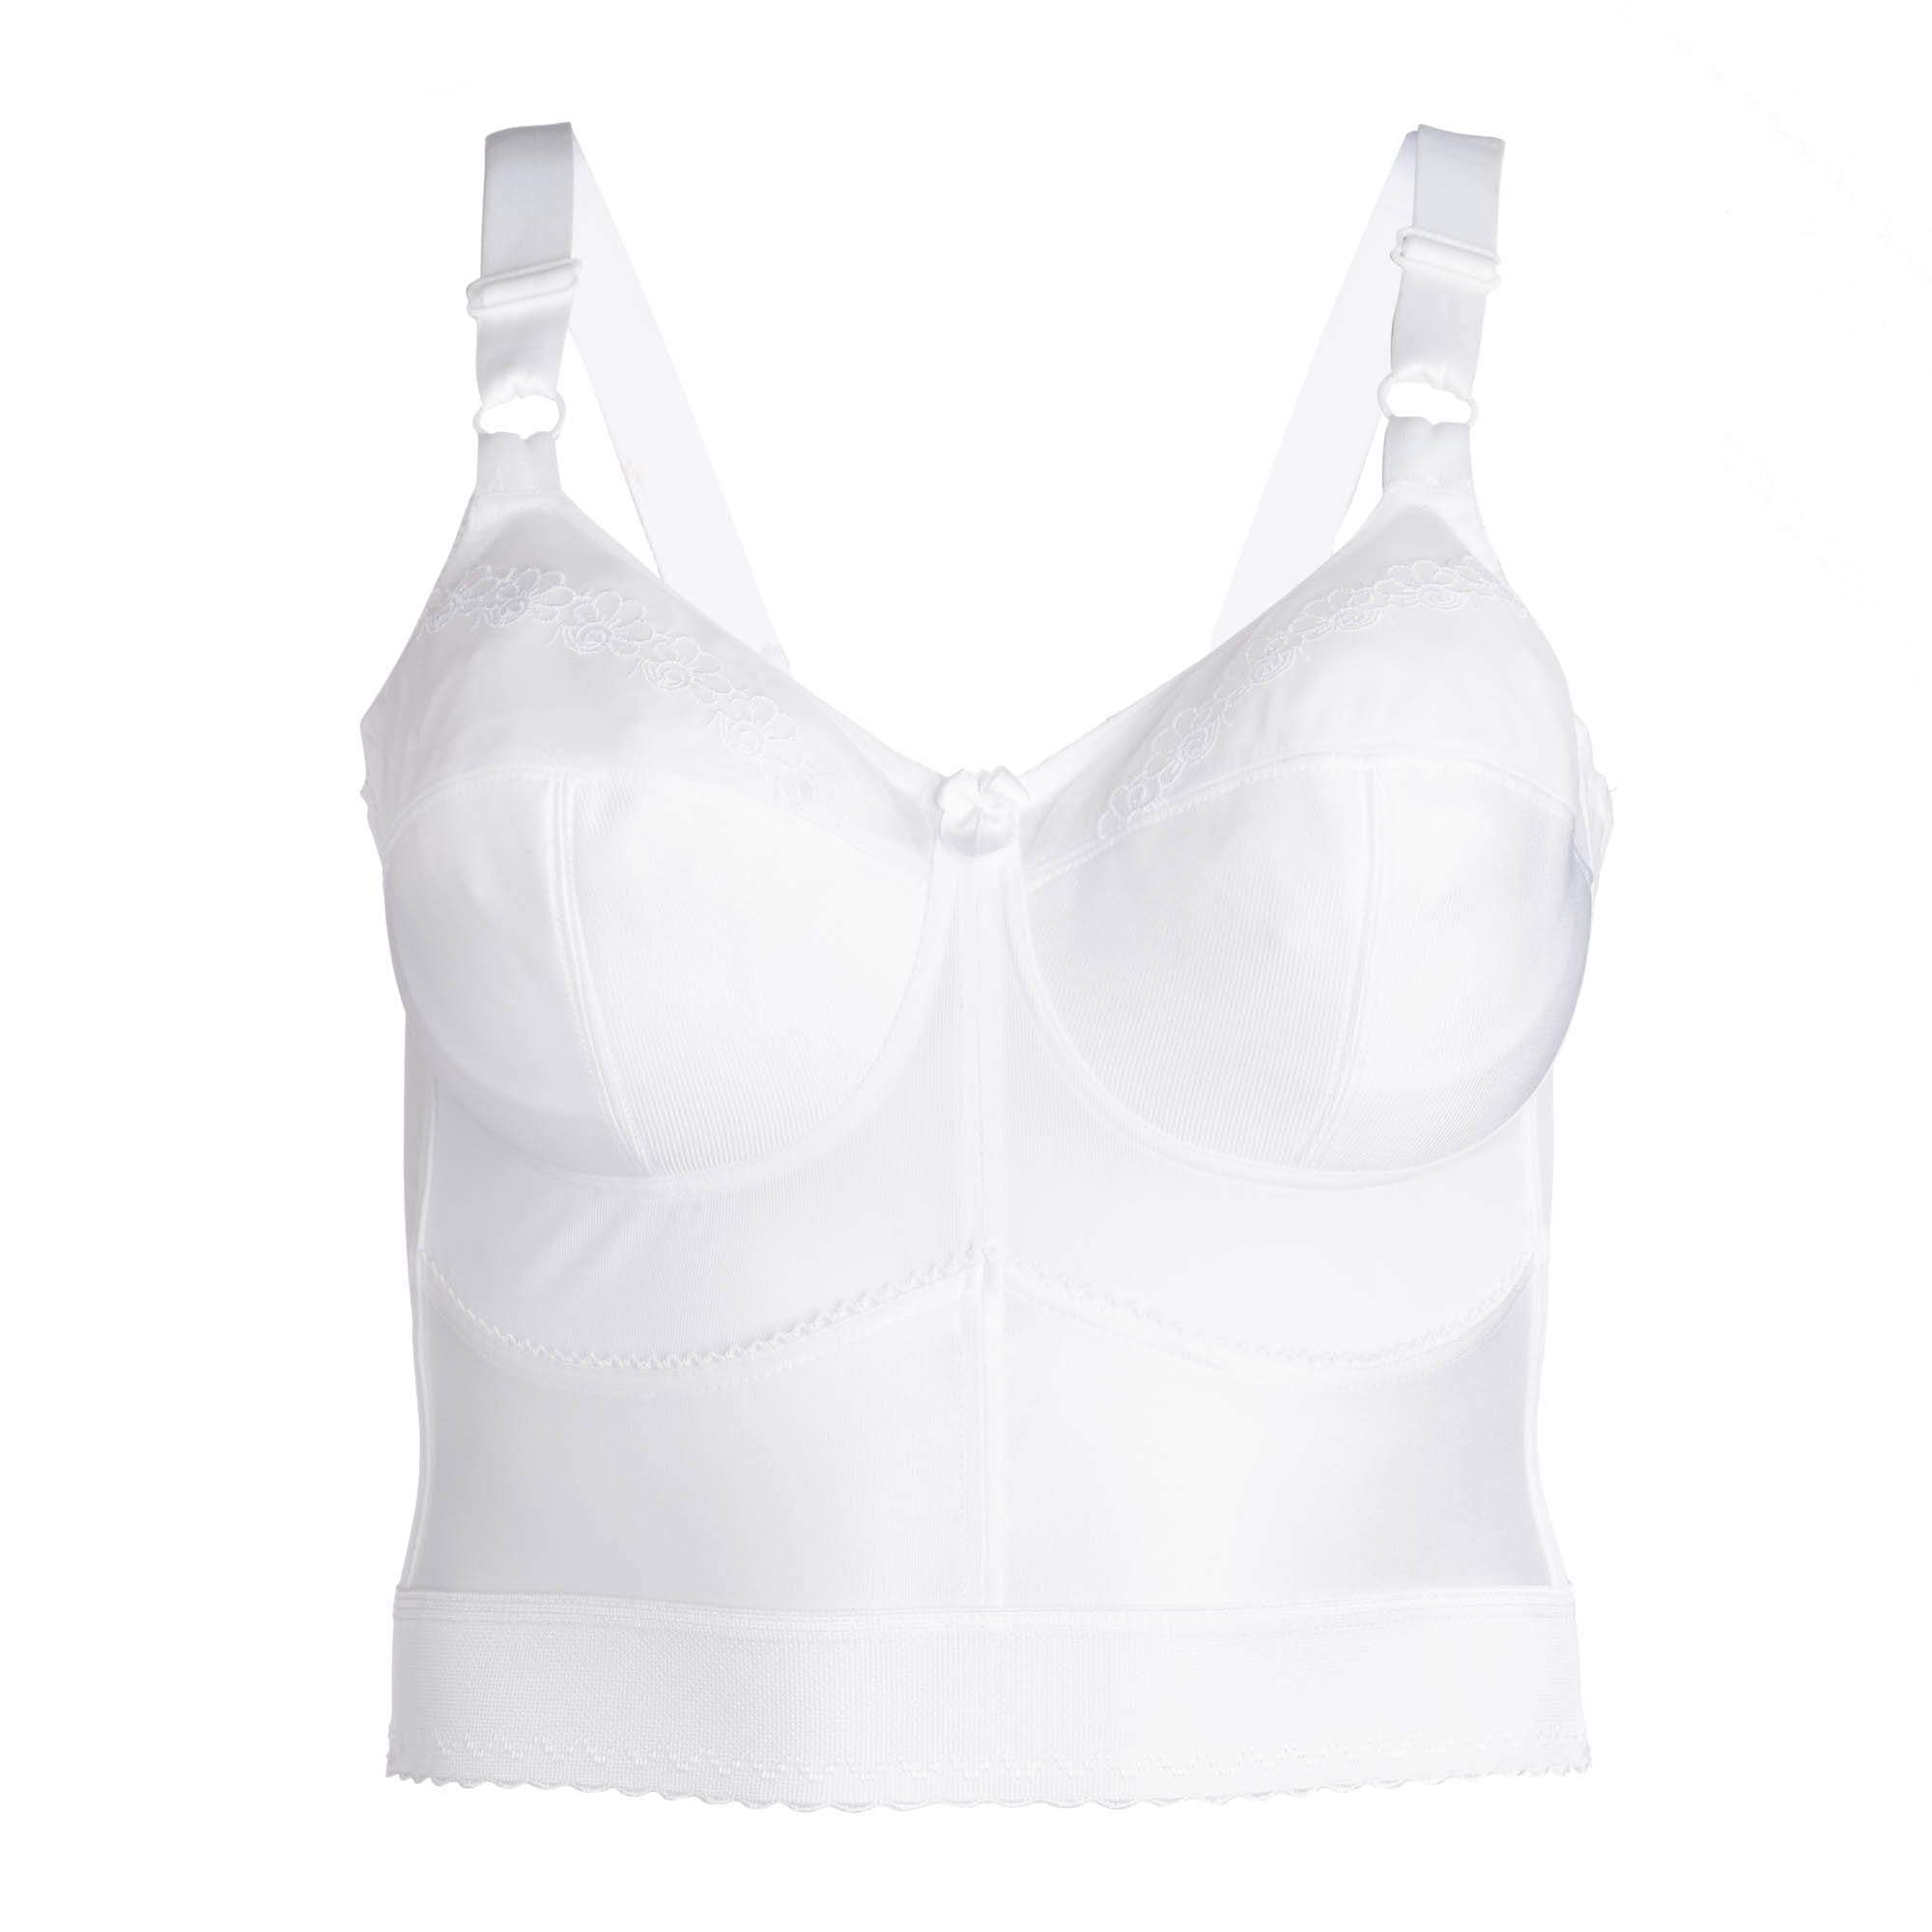 CORTLAND INTIMATES STYLE 7808 - Embroidered Soft Cup Long Line Bra - W ...